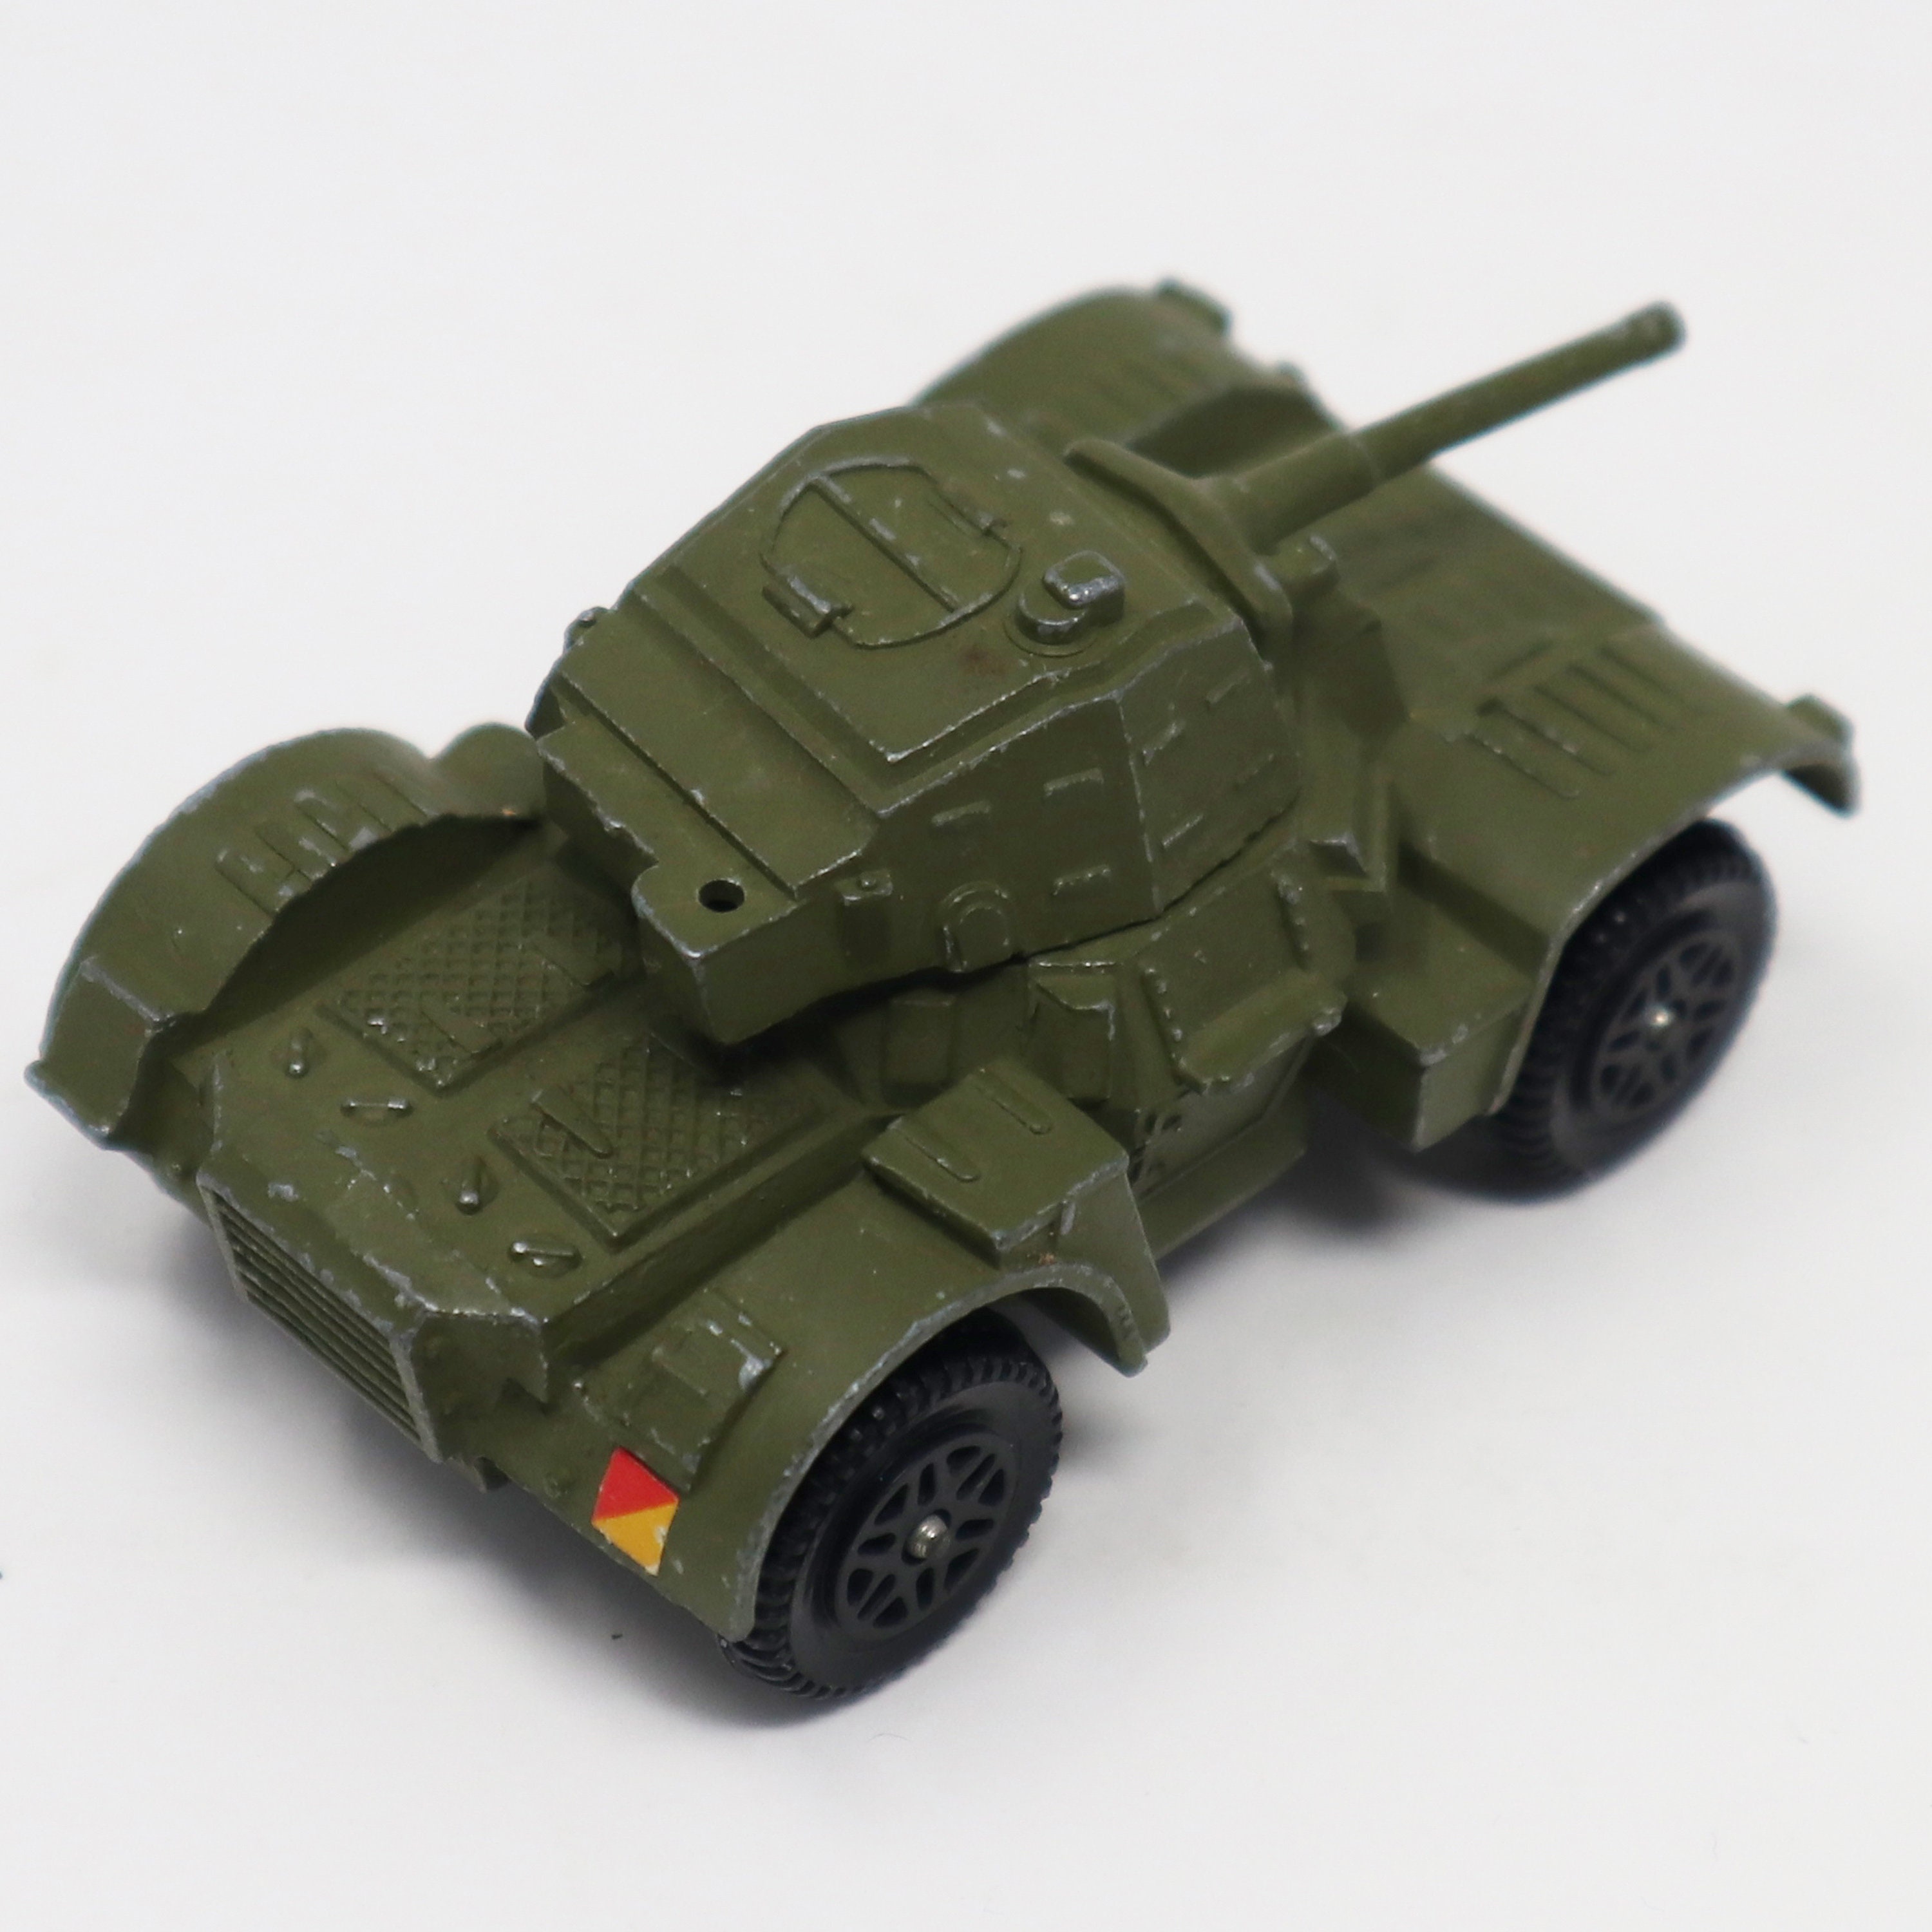 Buy Dinky Toys Jeep Militaire Diecast Online in India 